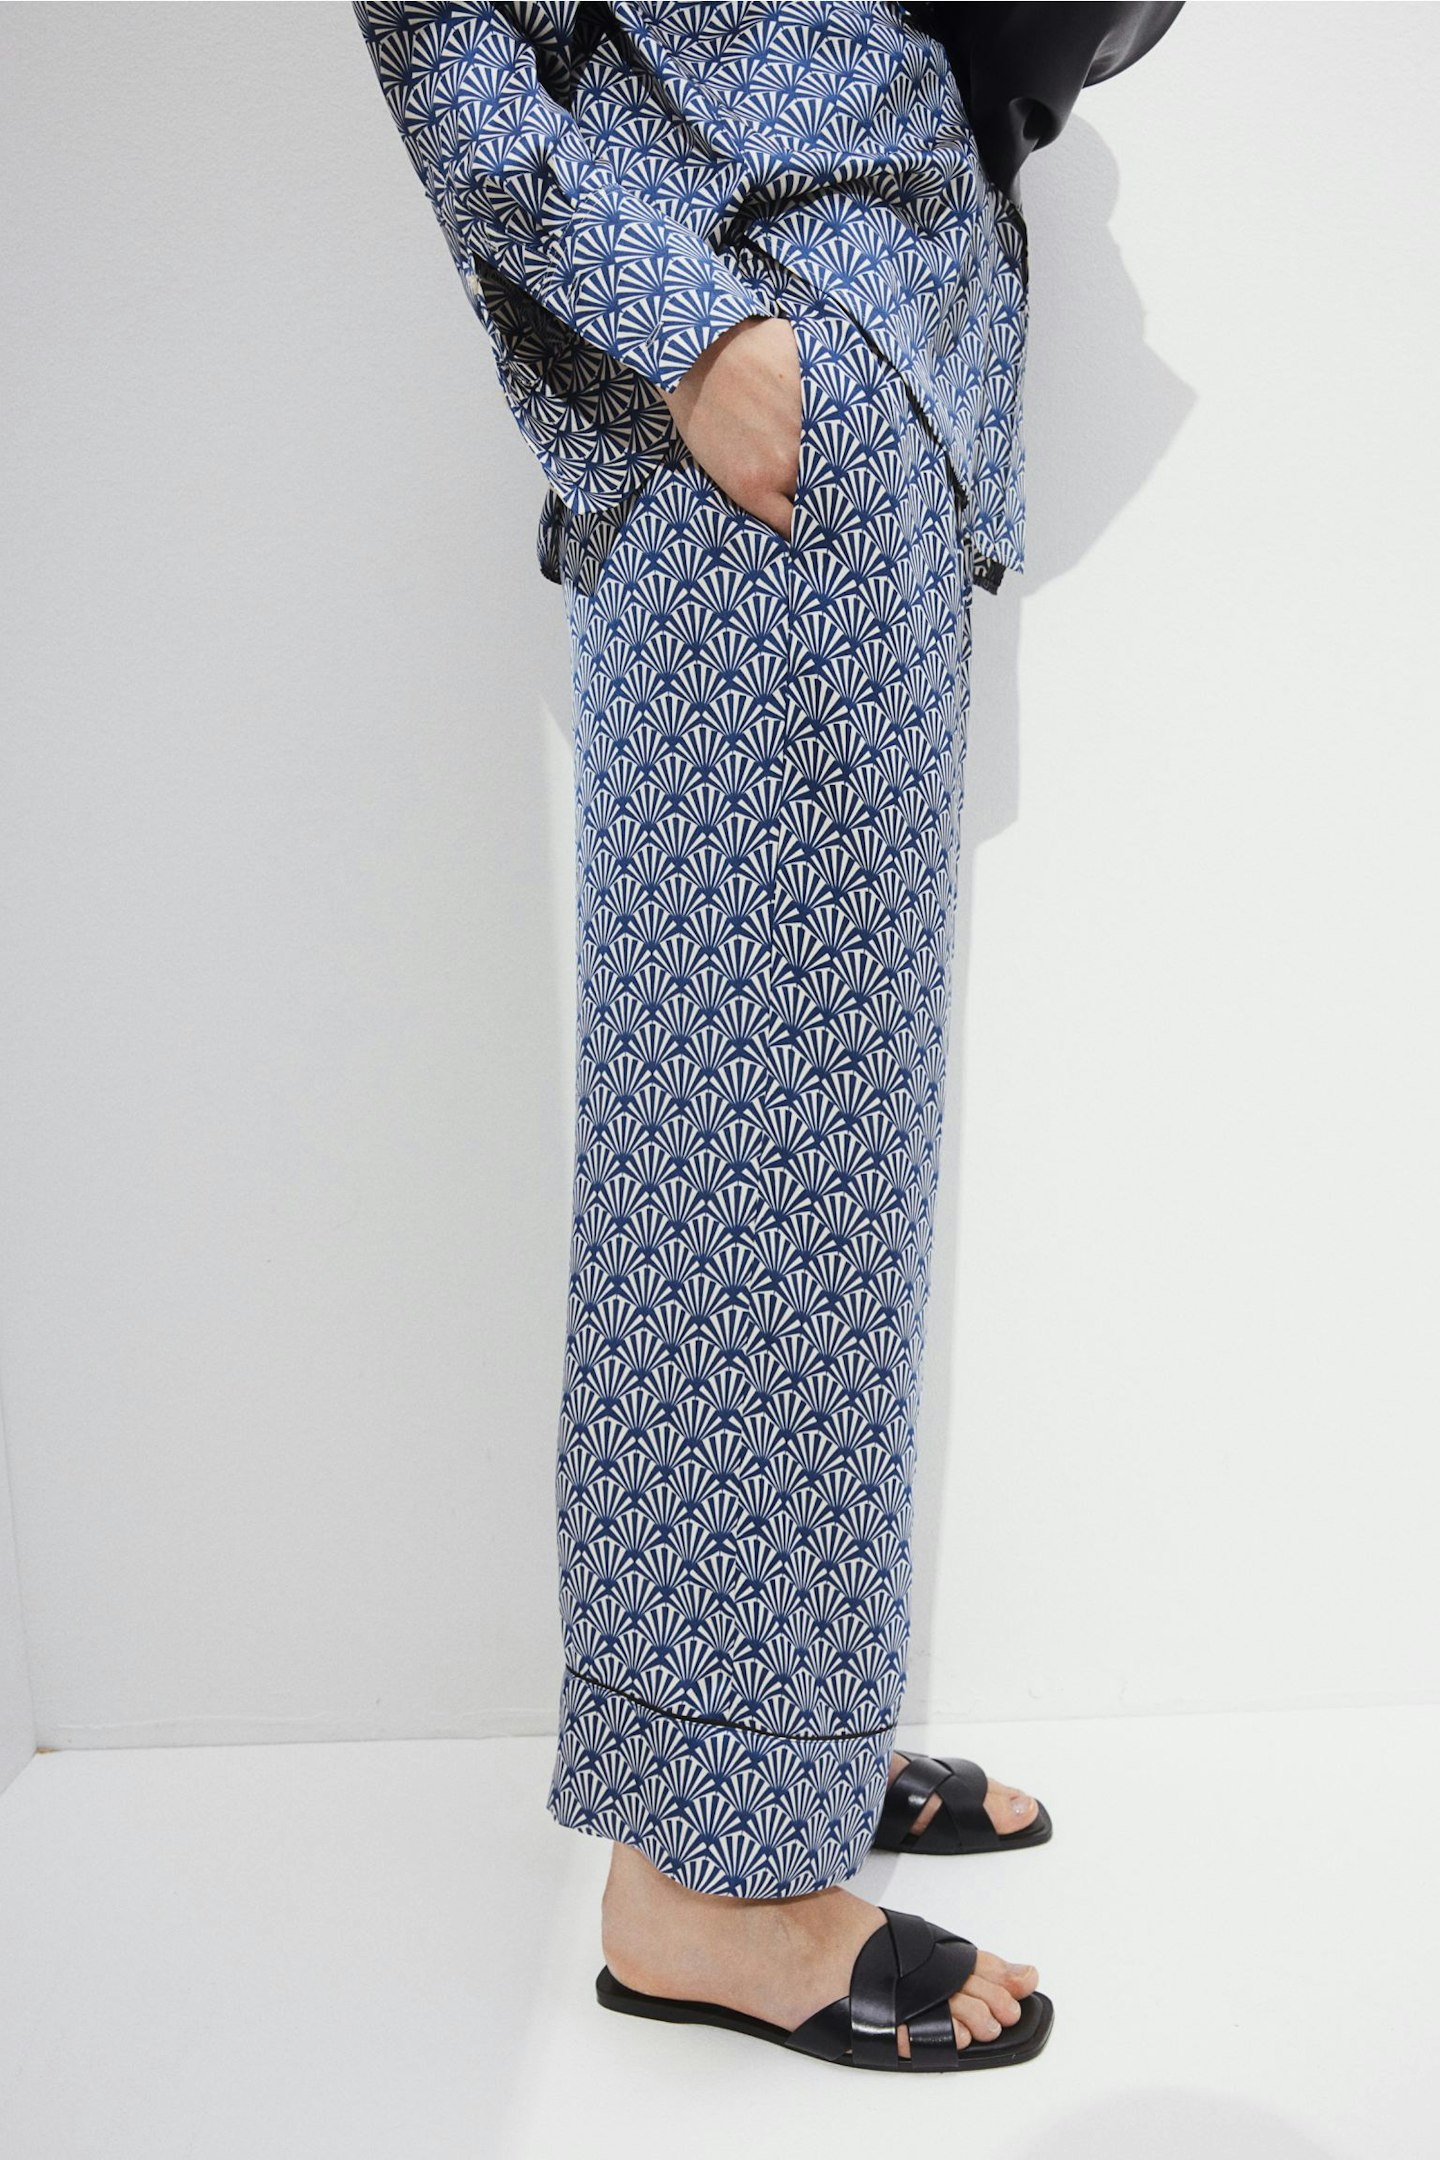 H&M Pull-On Satin Trousers with blue and white fan print